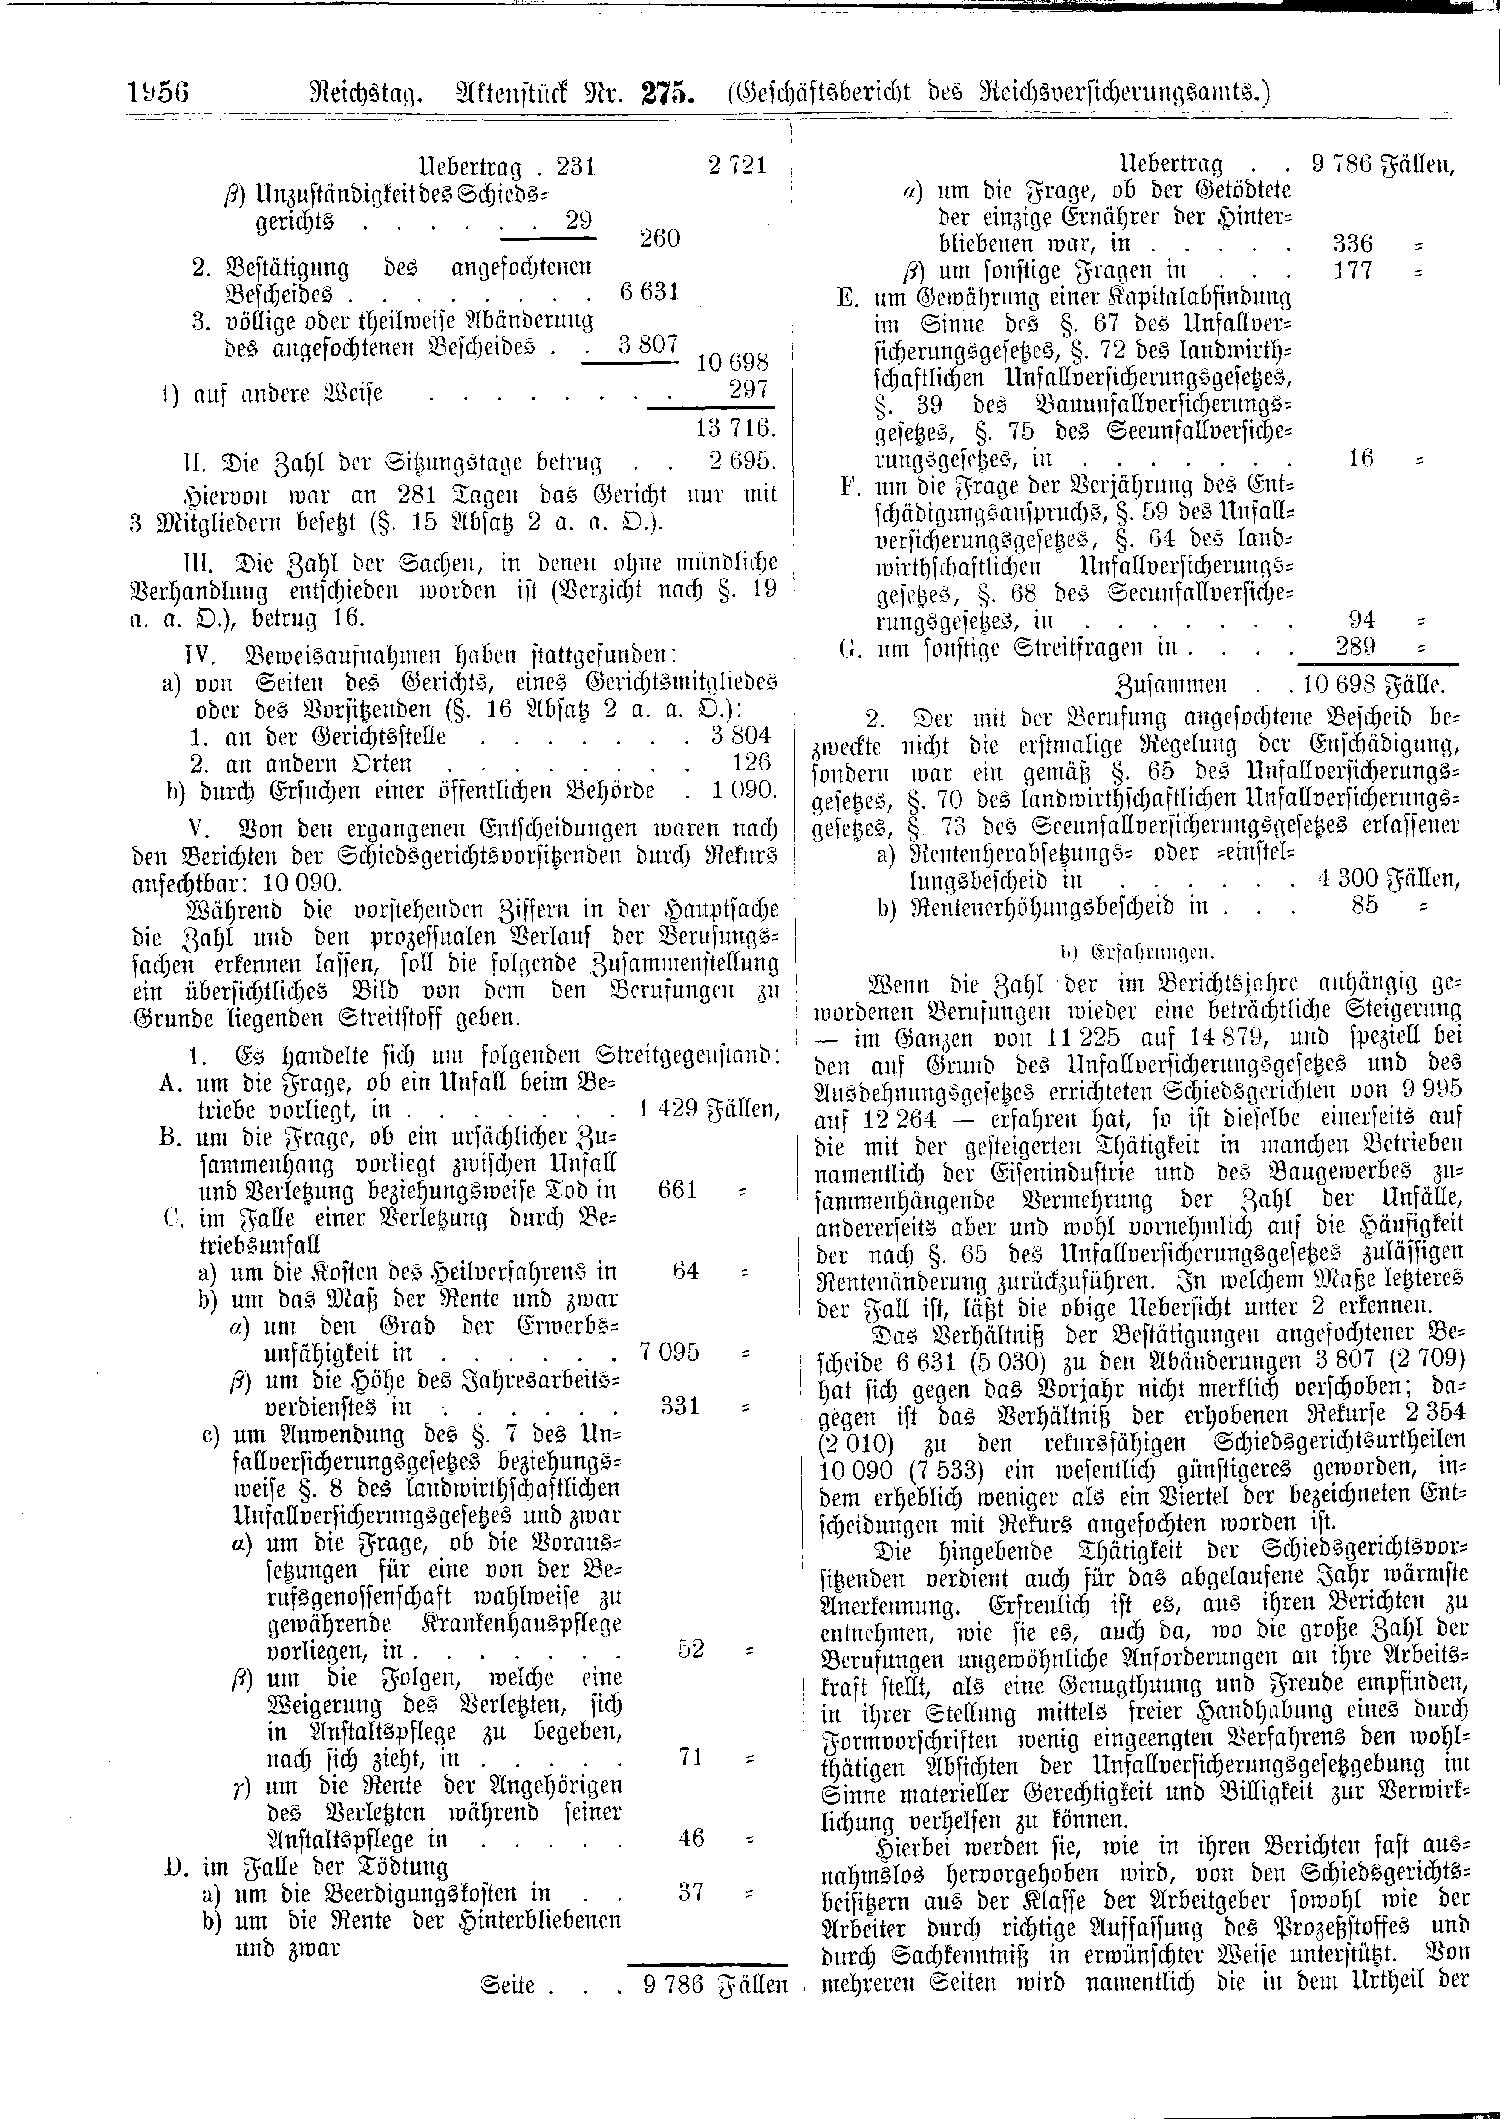 Scan of page 1956